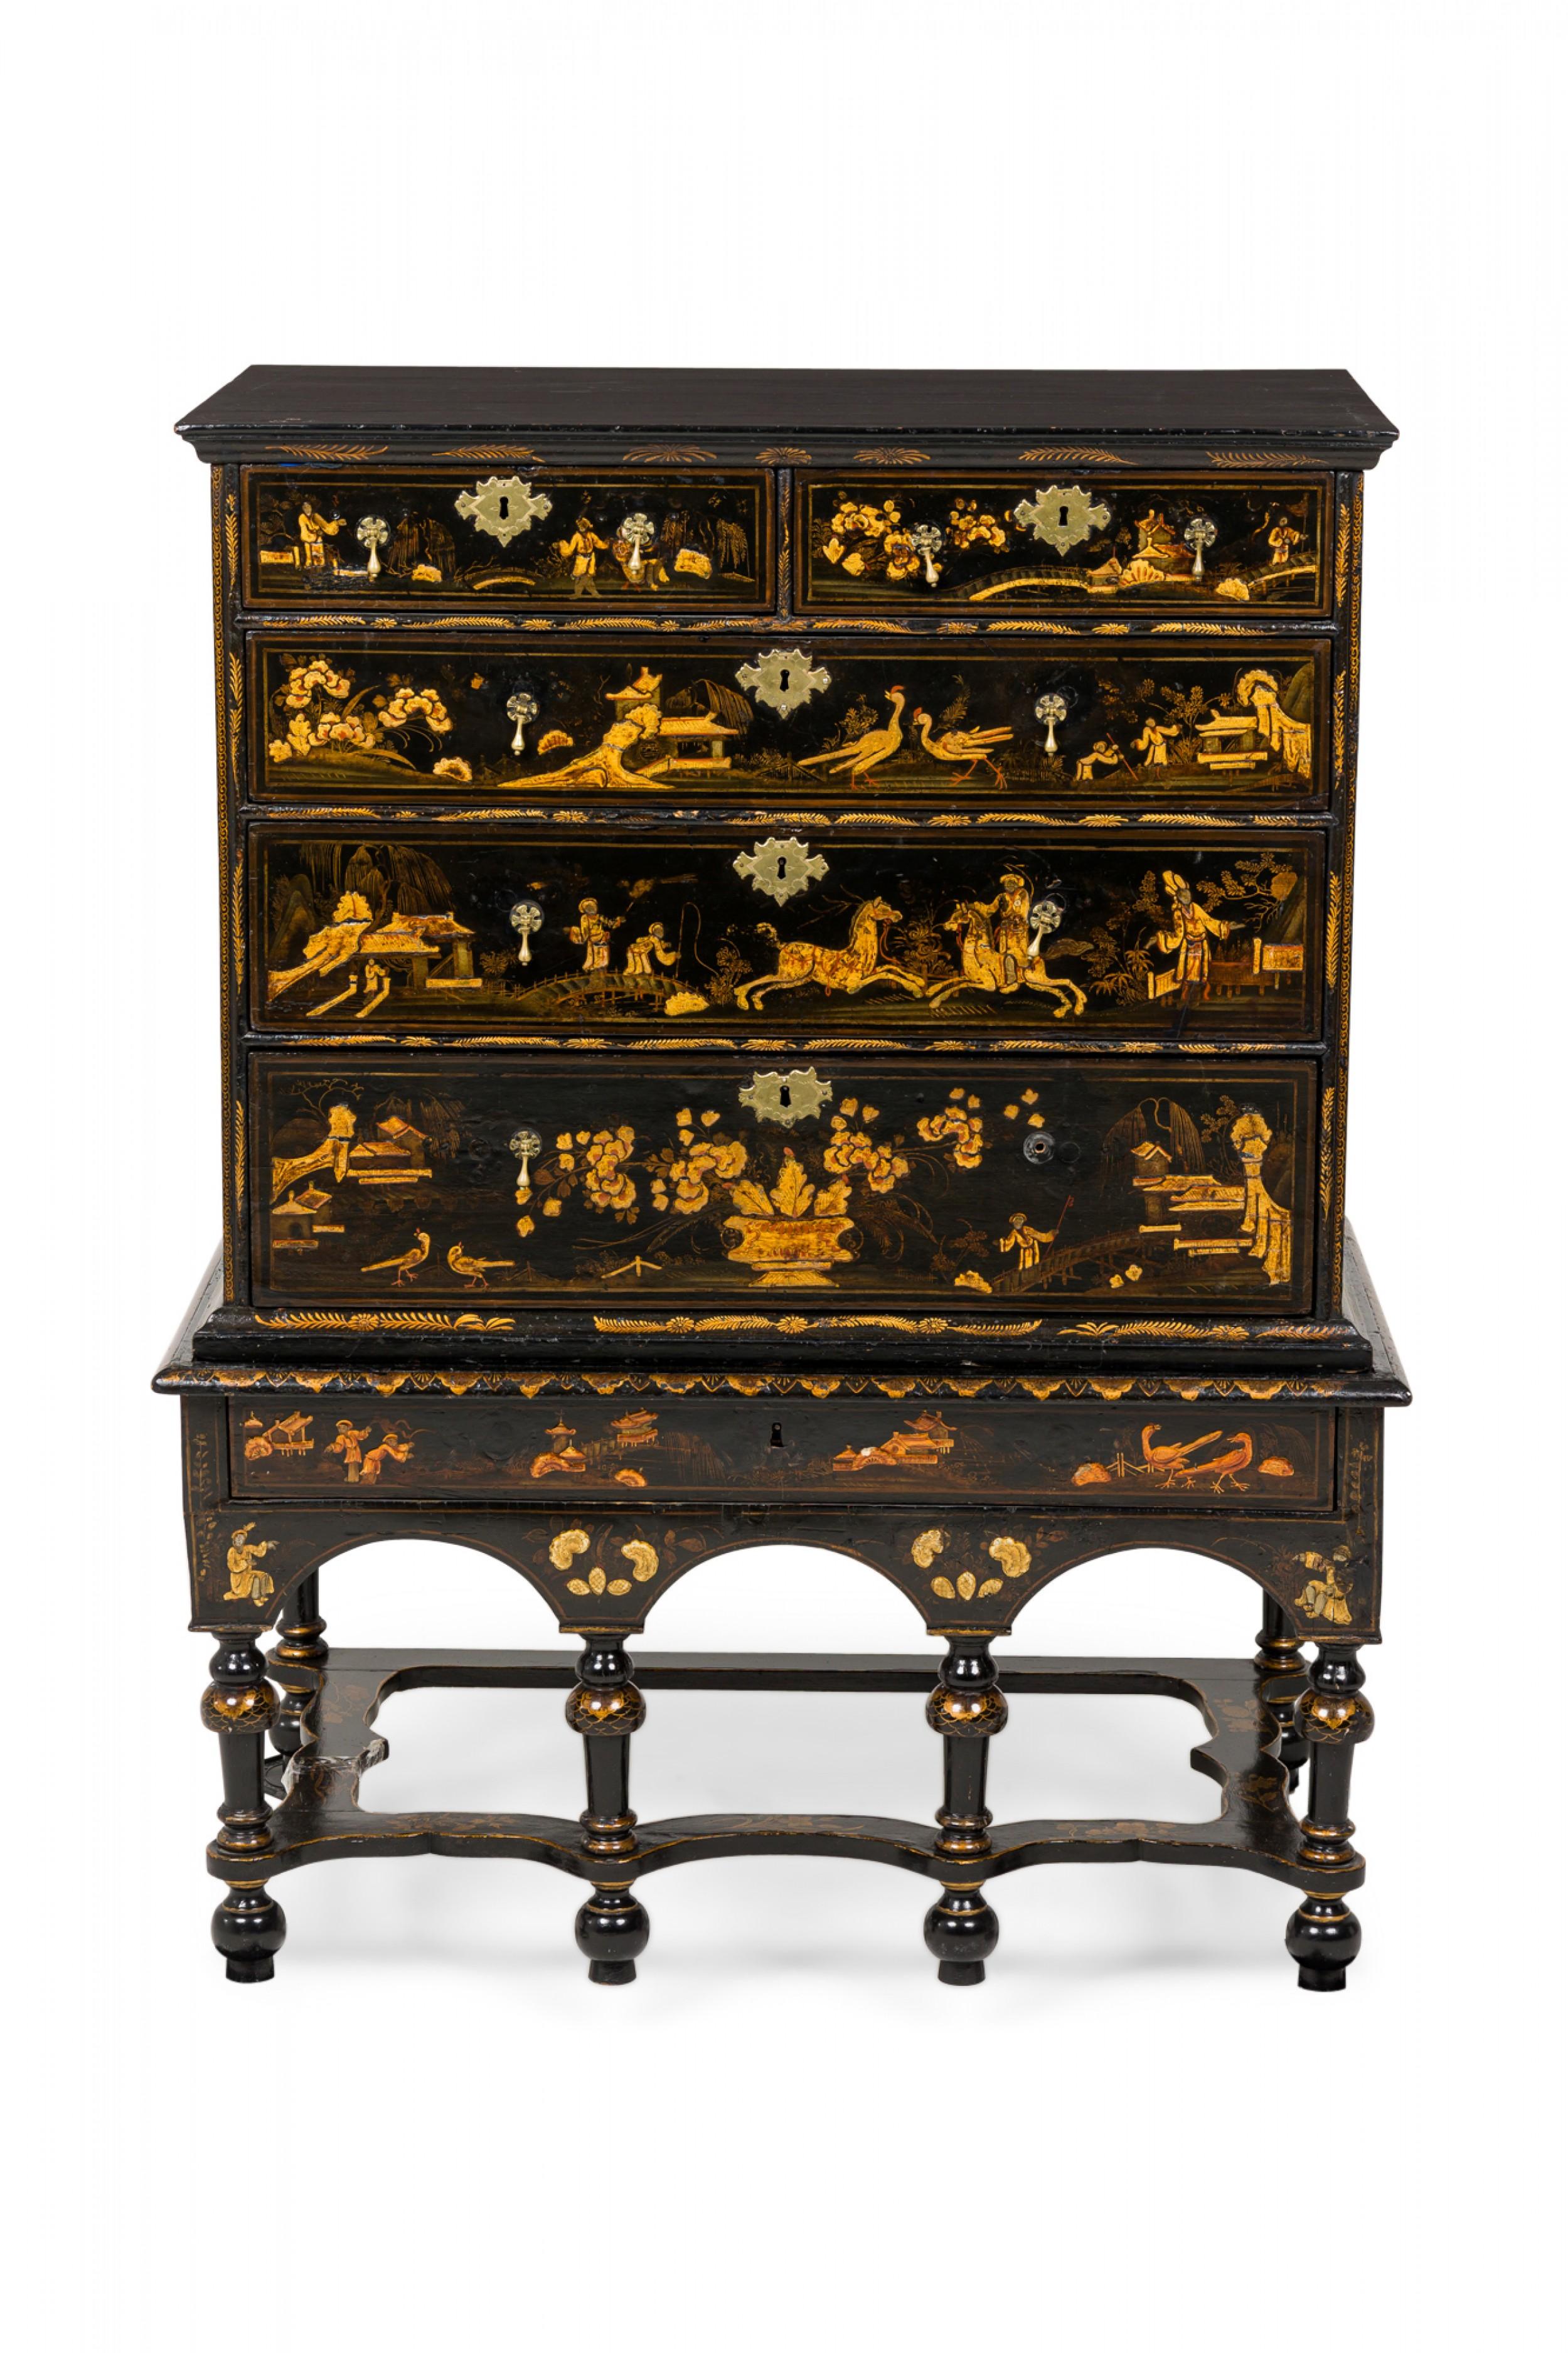 English Georgian style (18/19th Century) highboy chest in two sections with painted Chinoiserie lacquer figural scenes, the top section features two top drawers with inlaid felt flatware separators, followed by a compartmented full drawer, followed